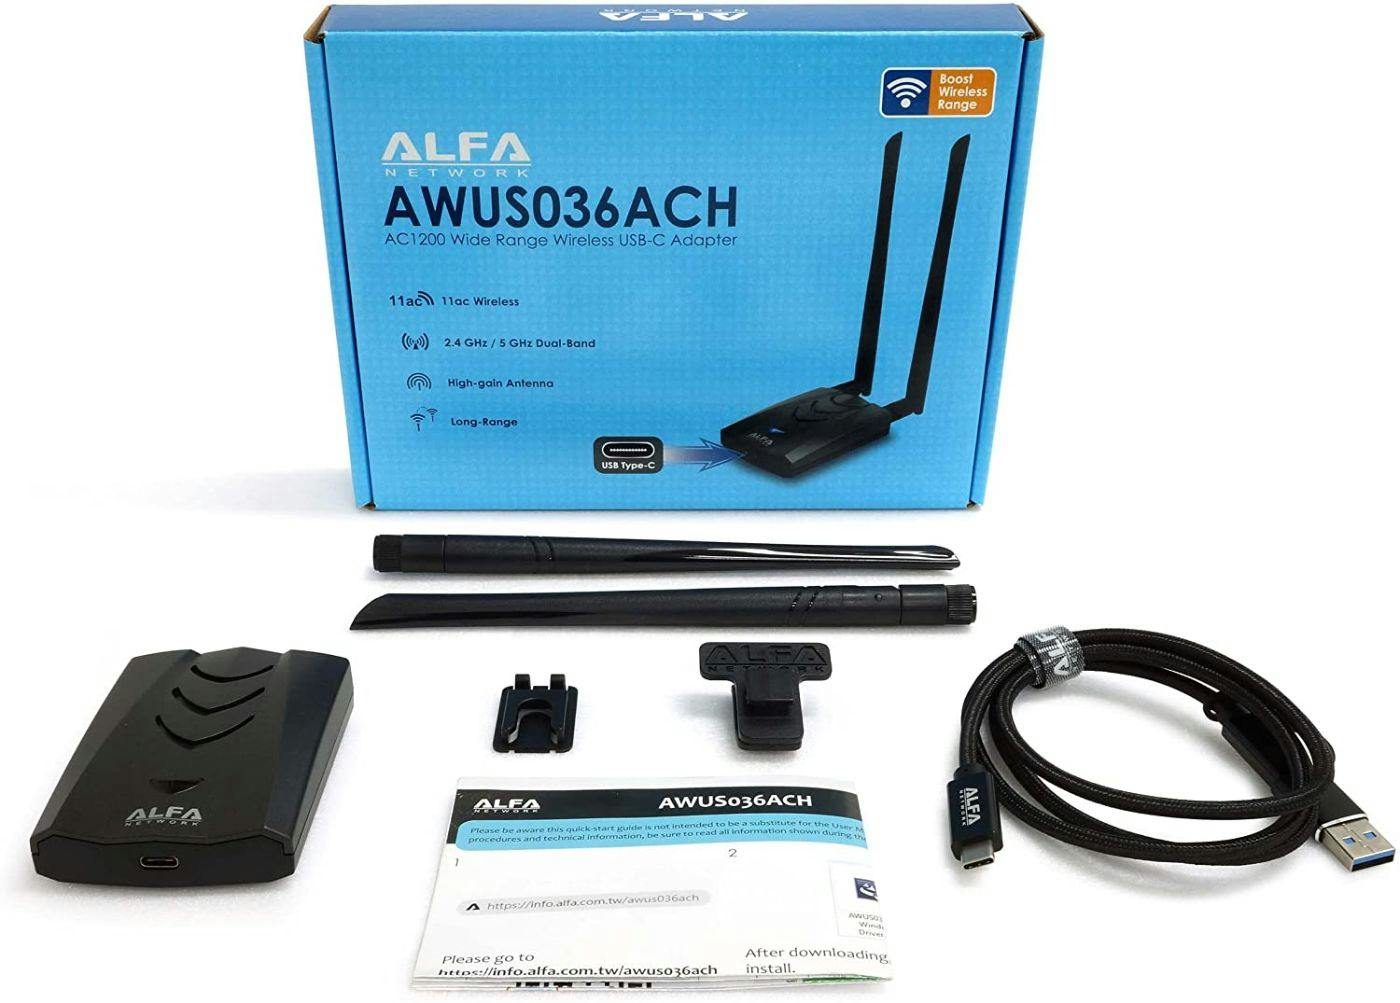 featured image - Configuring the Alpha AWUS036ACH Wi-Fi Adapter on Kali Linux